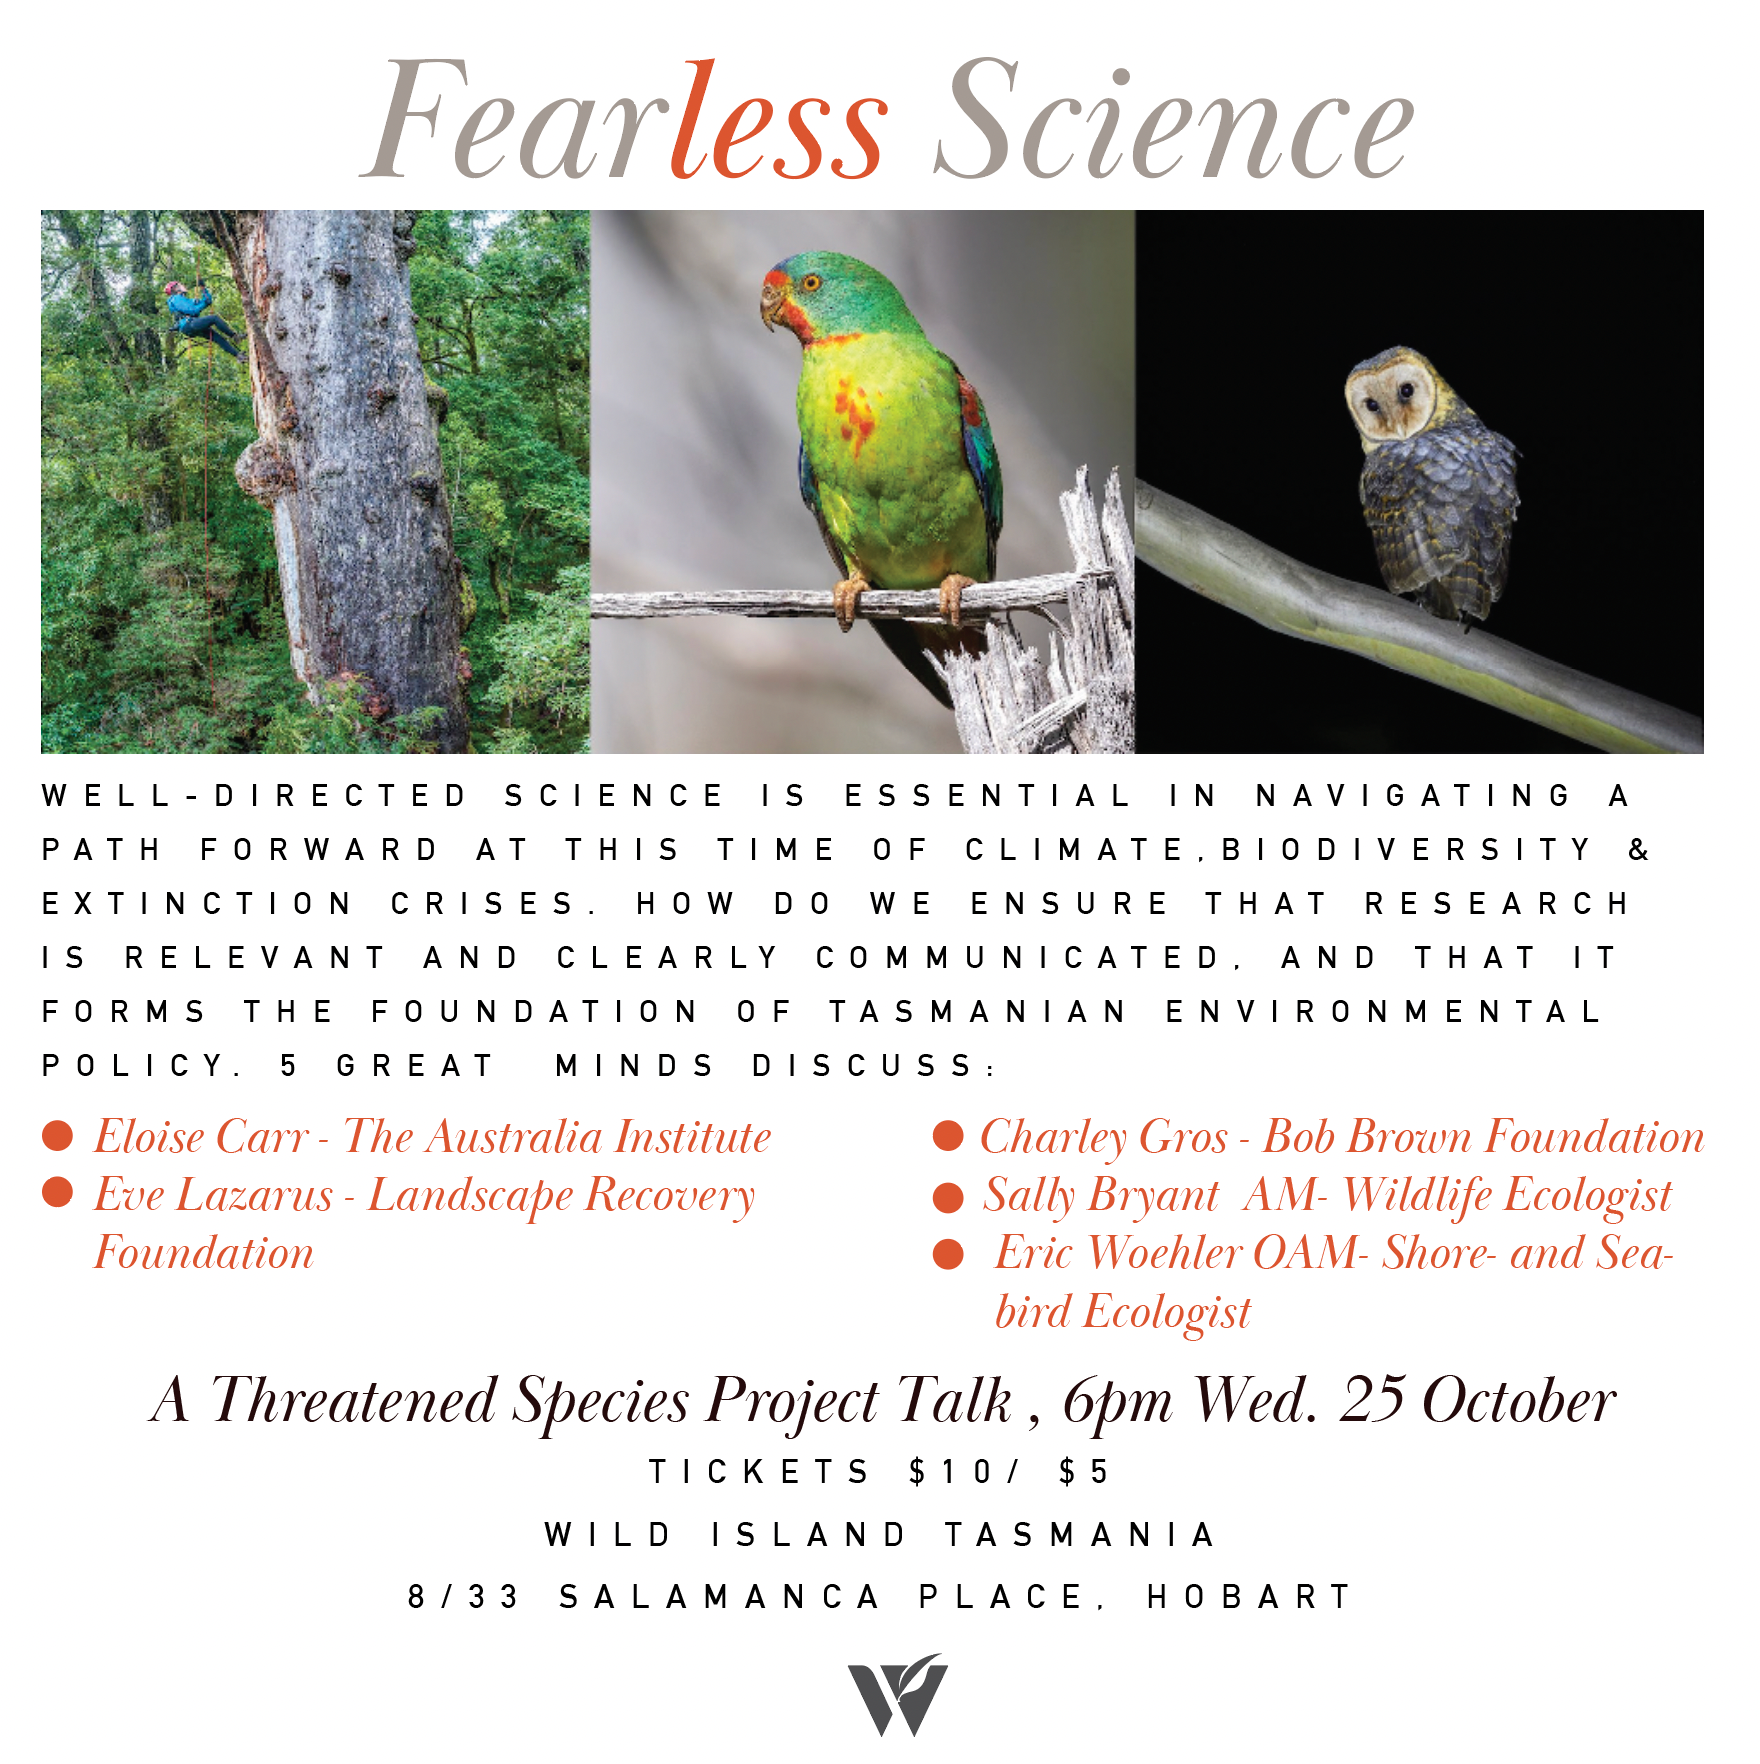 FearLESS Science- A Threatened Species Project Talk